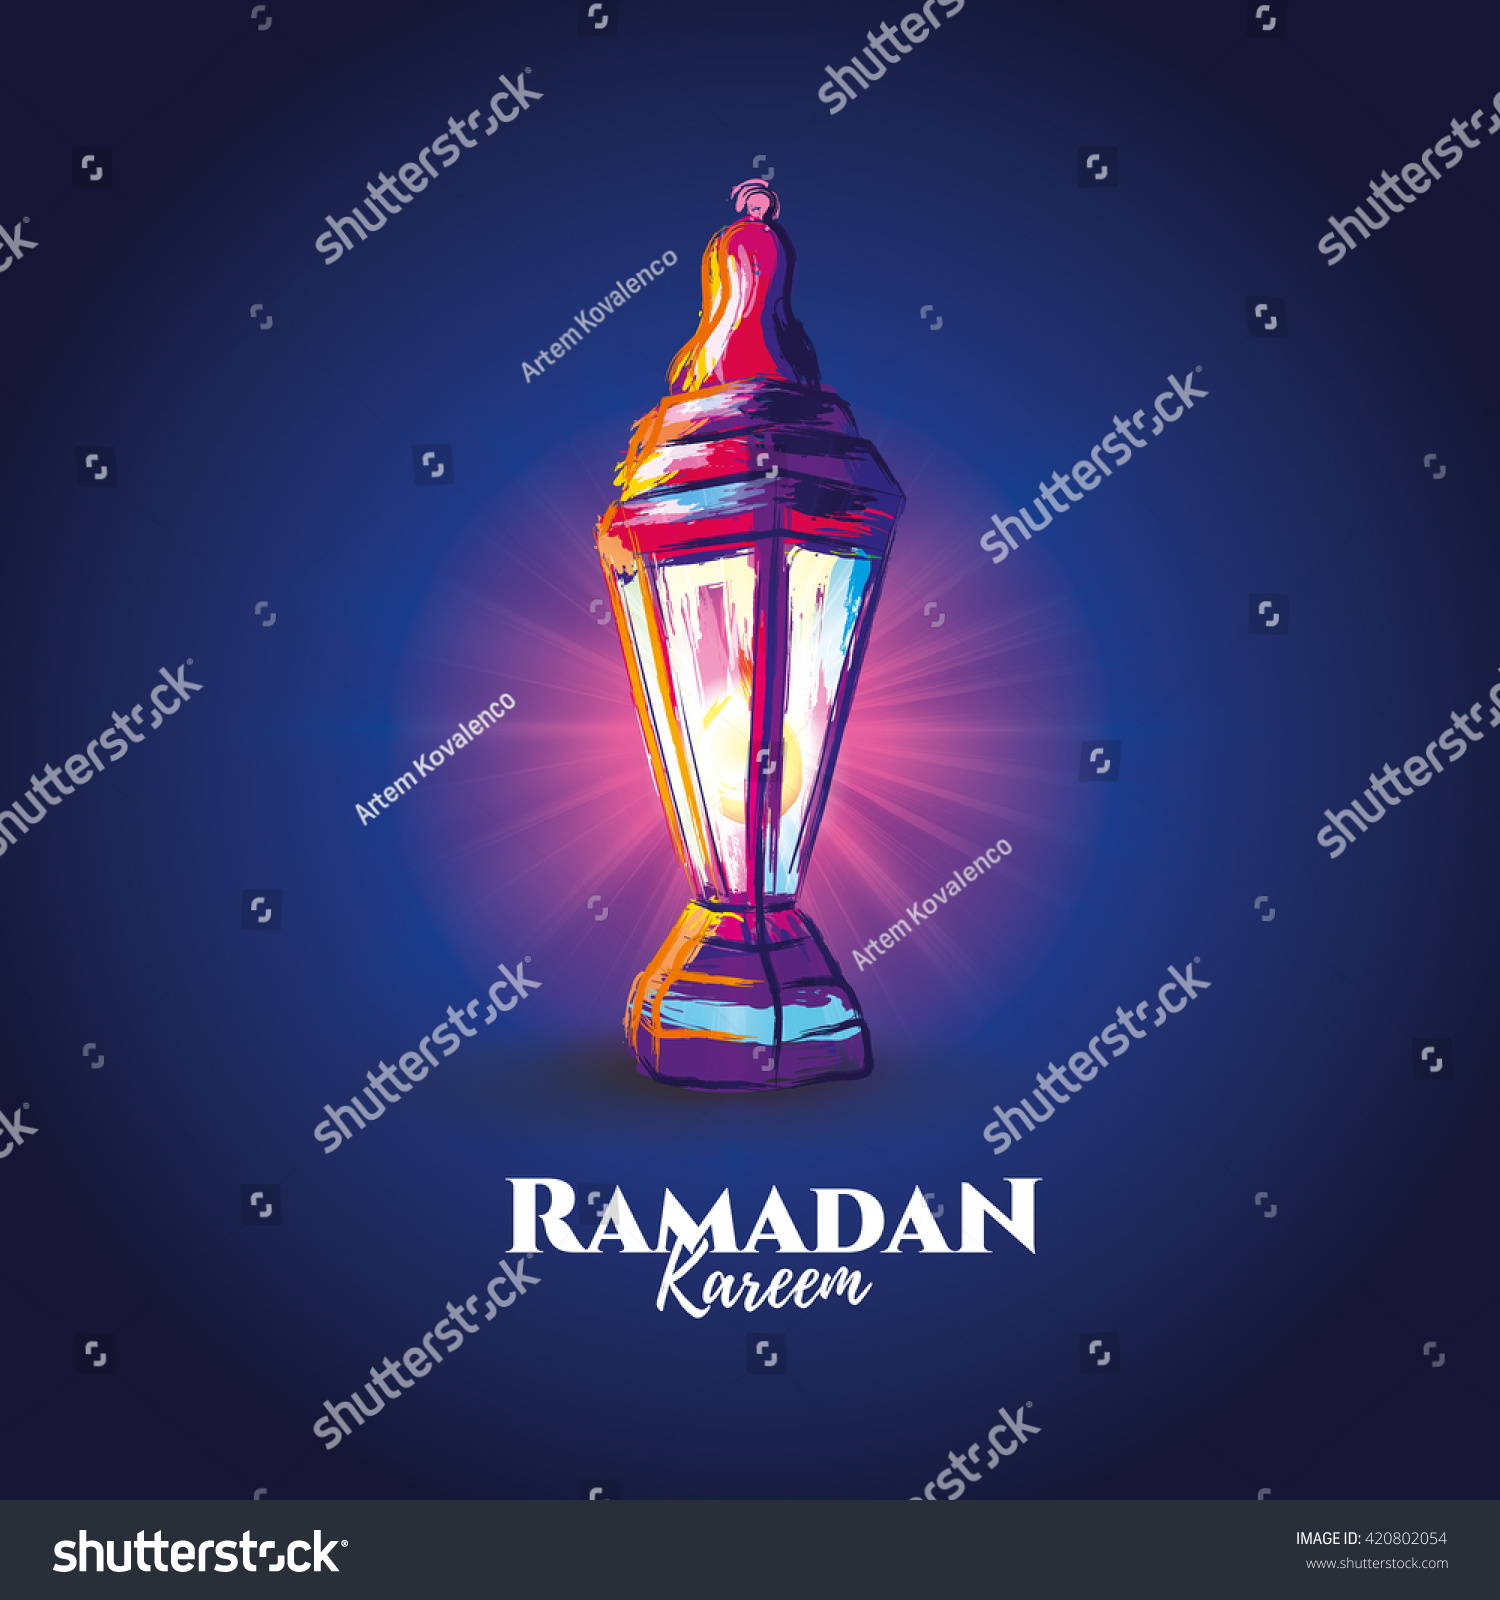 vector illustration of a lantern Fanus, the Muslim feast of the holy month of Ramadan Kareem. illustrations in the style of watercolor paints.  #420802054